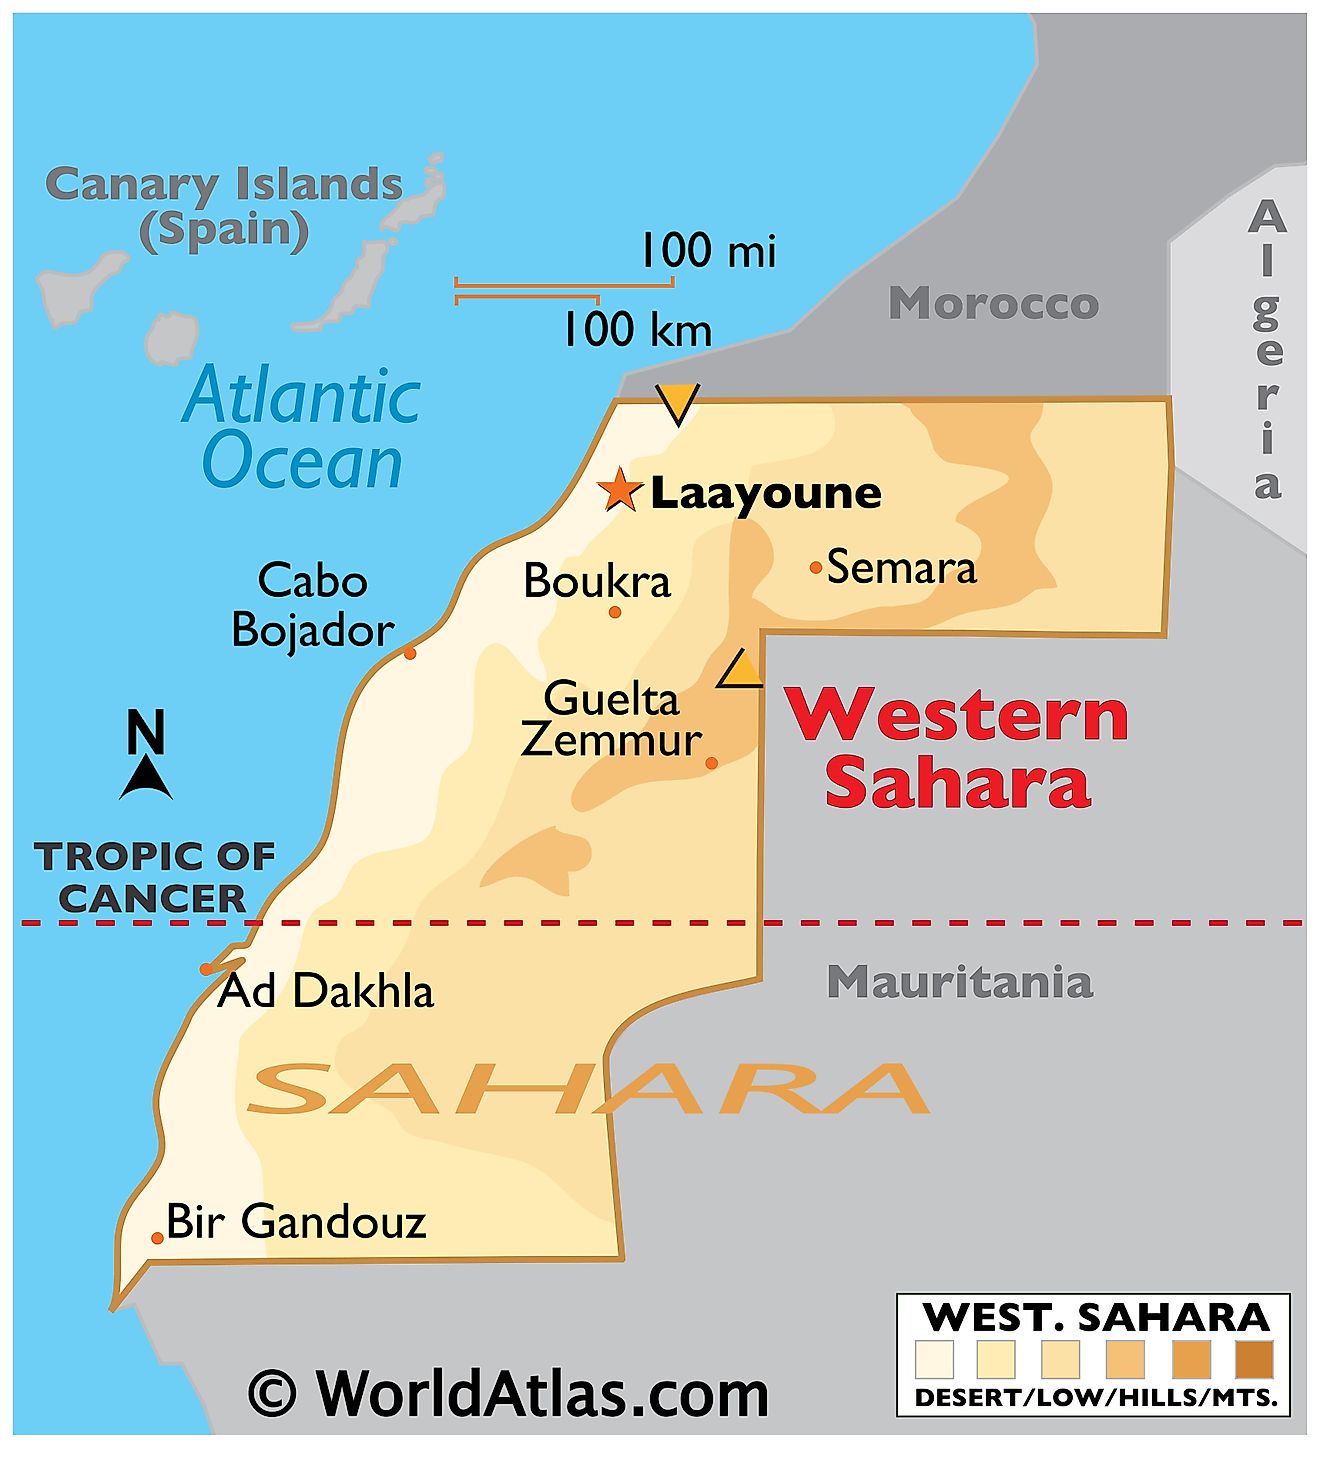 Physical Map of Western Sahara showing desert occupying most of its territory.